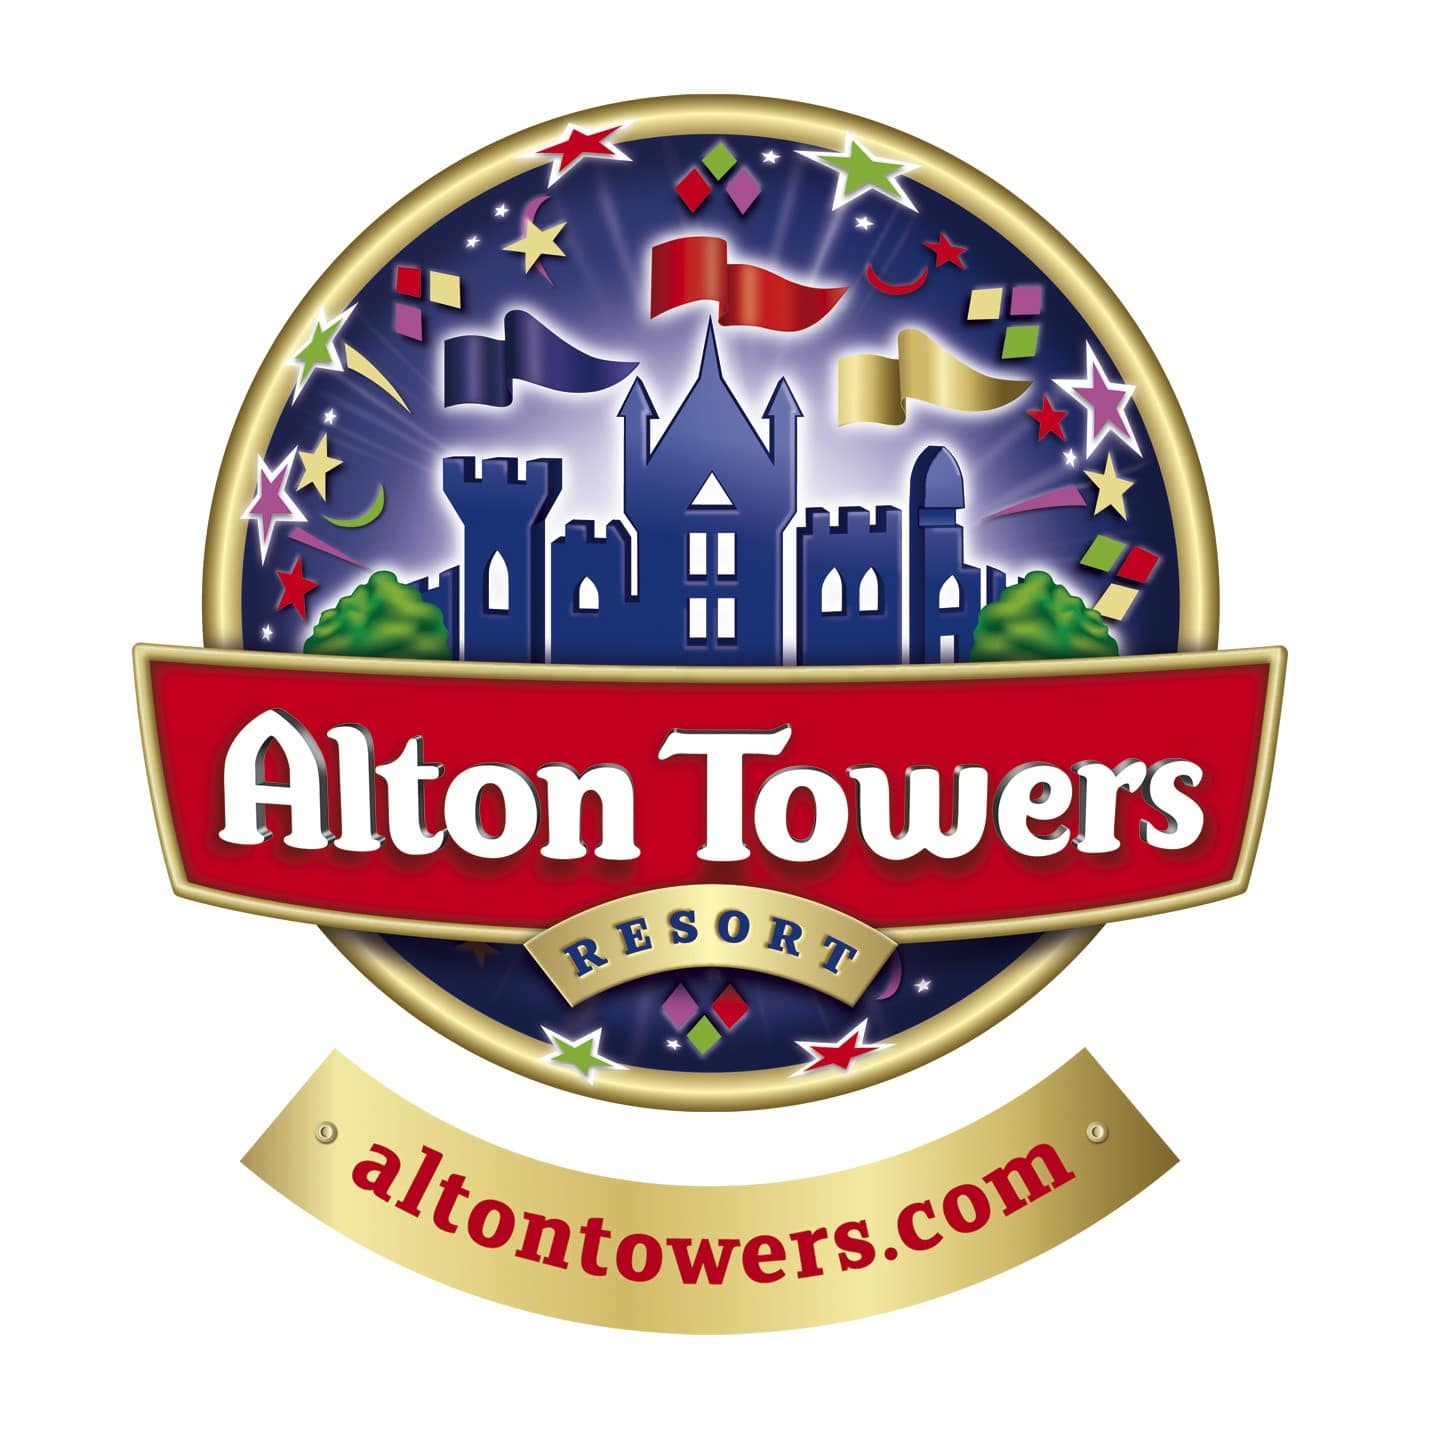 Alton Towers logo lost and found